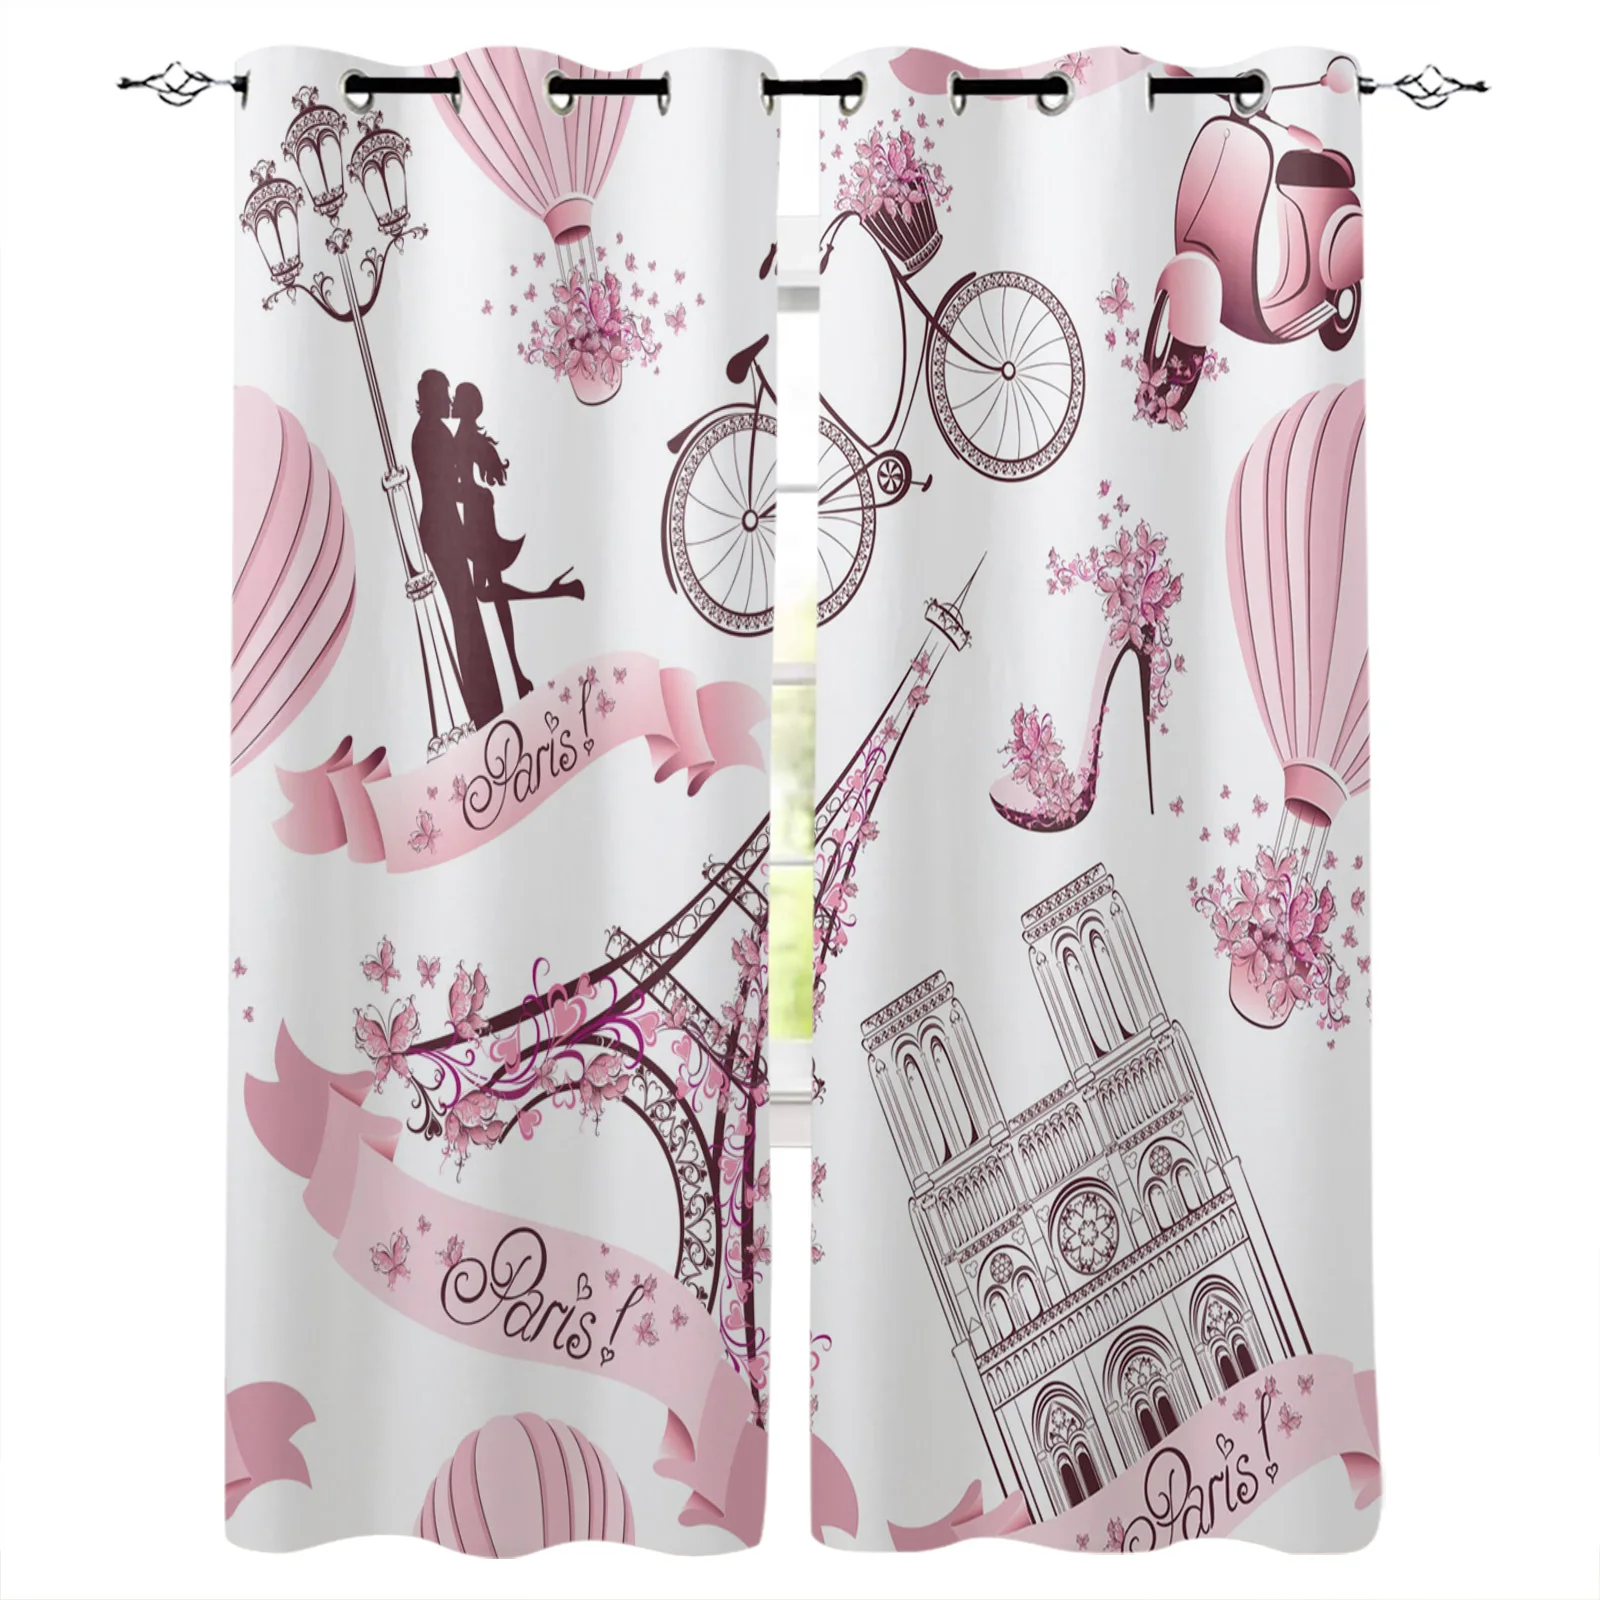 Pink Eiffel Tower High Heels Flower Hot Air Balloon Bicycle Blackout Curtains Girl Bedroom Kids Curtains For Living Room Decor